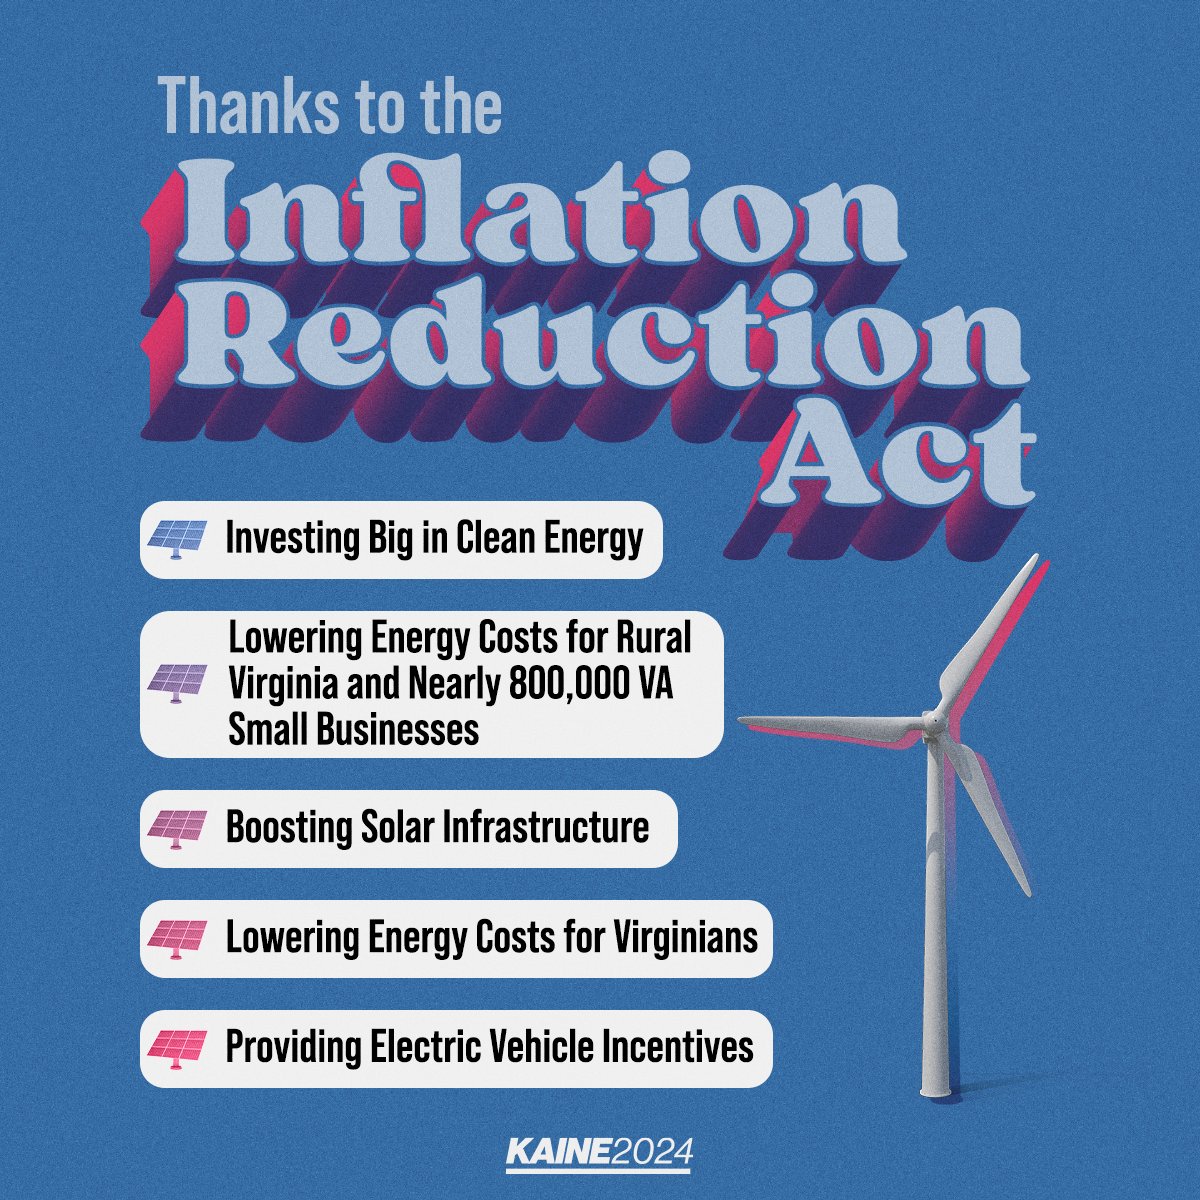 We are responsible for leaving this planet in a better place for generations to come. I was proud to vote for the Inflation Reduction Act because it’s the biggest climate legislation in history—spurring clean energy growth in Virginia’s offshore wind and solar industries.